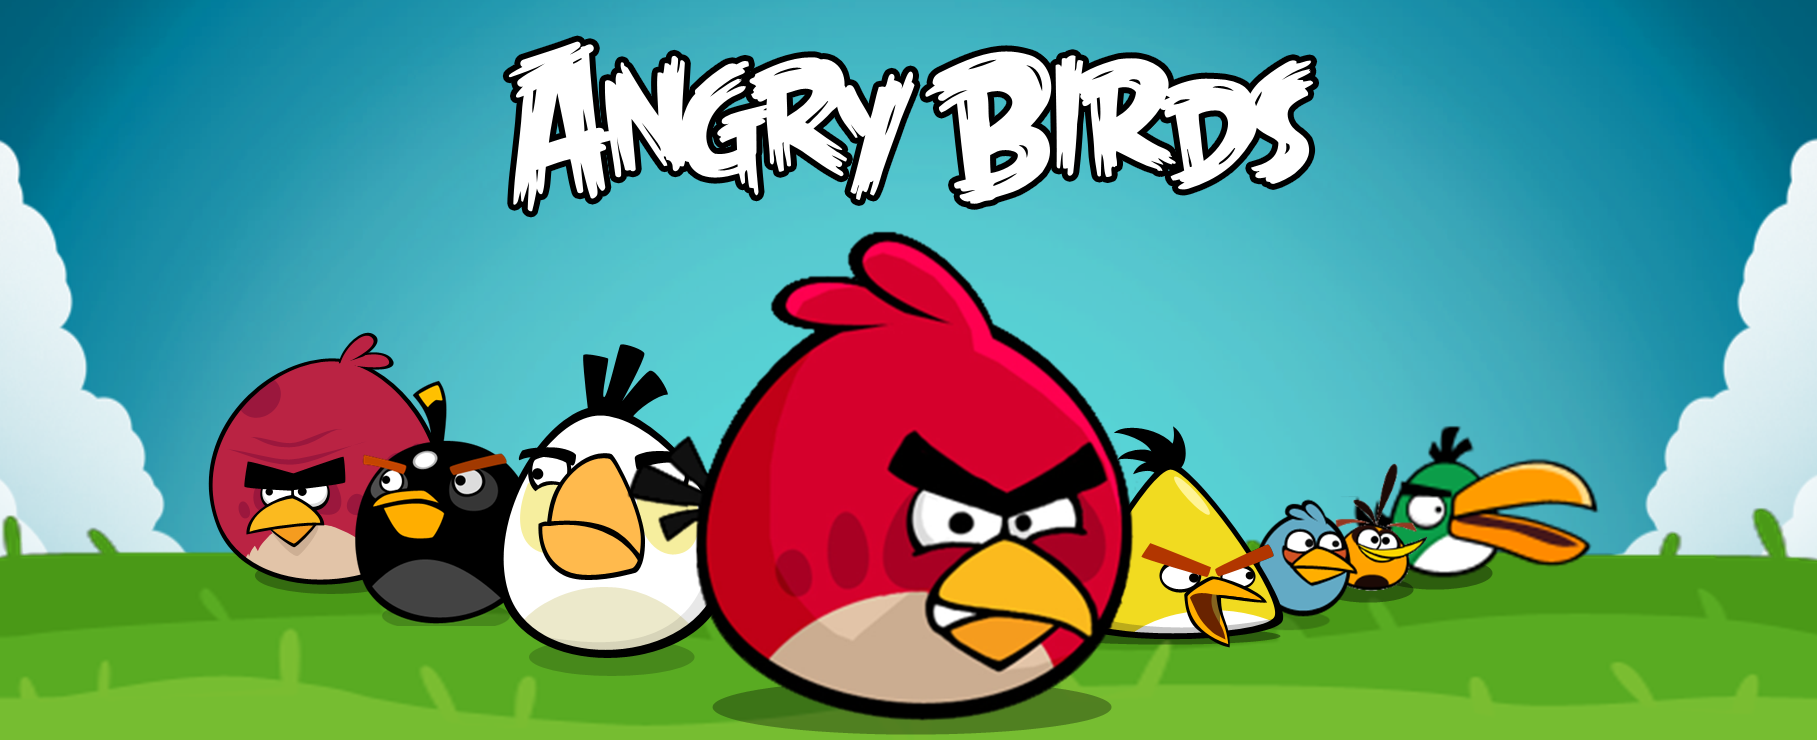 Angry Birds Wallpaper Collection 40